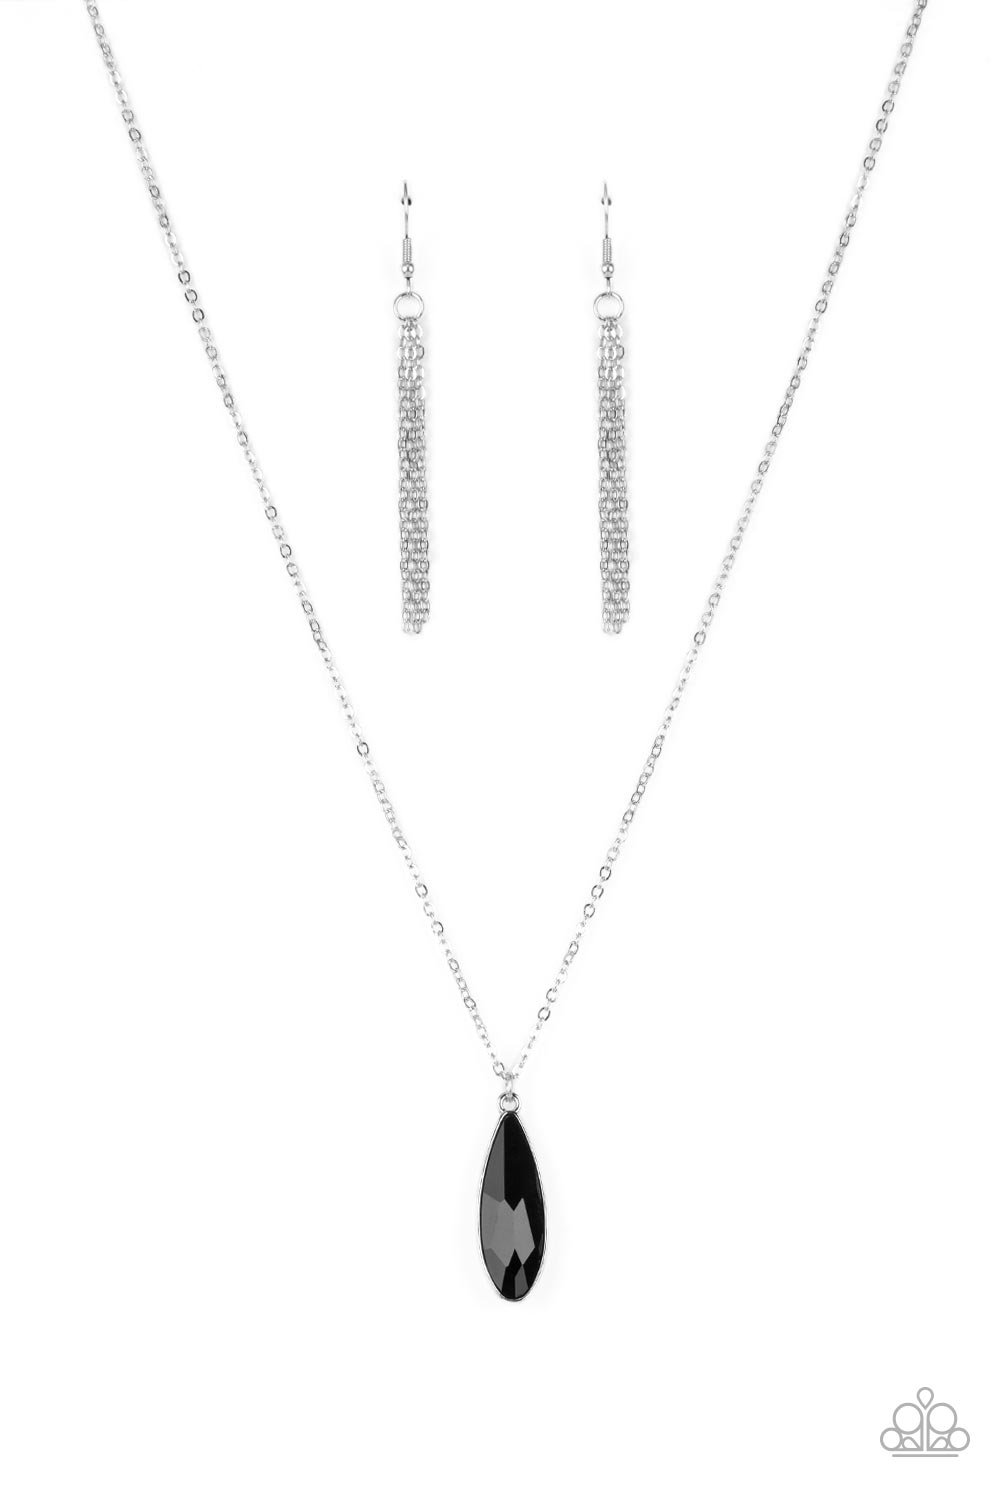 Prismatically Polished Black Necklace - Paparazzi Accessories- lightbox - CarasShop.com - $5 Jewelry by Cara Jewels